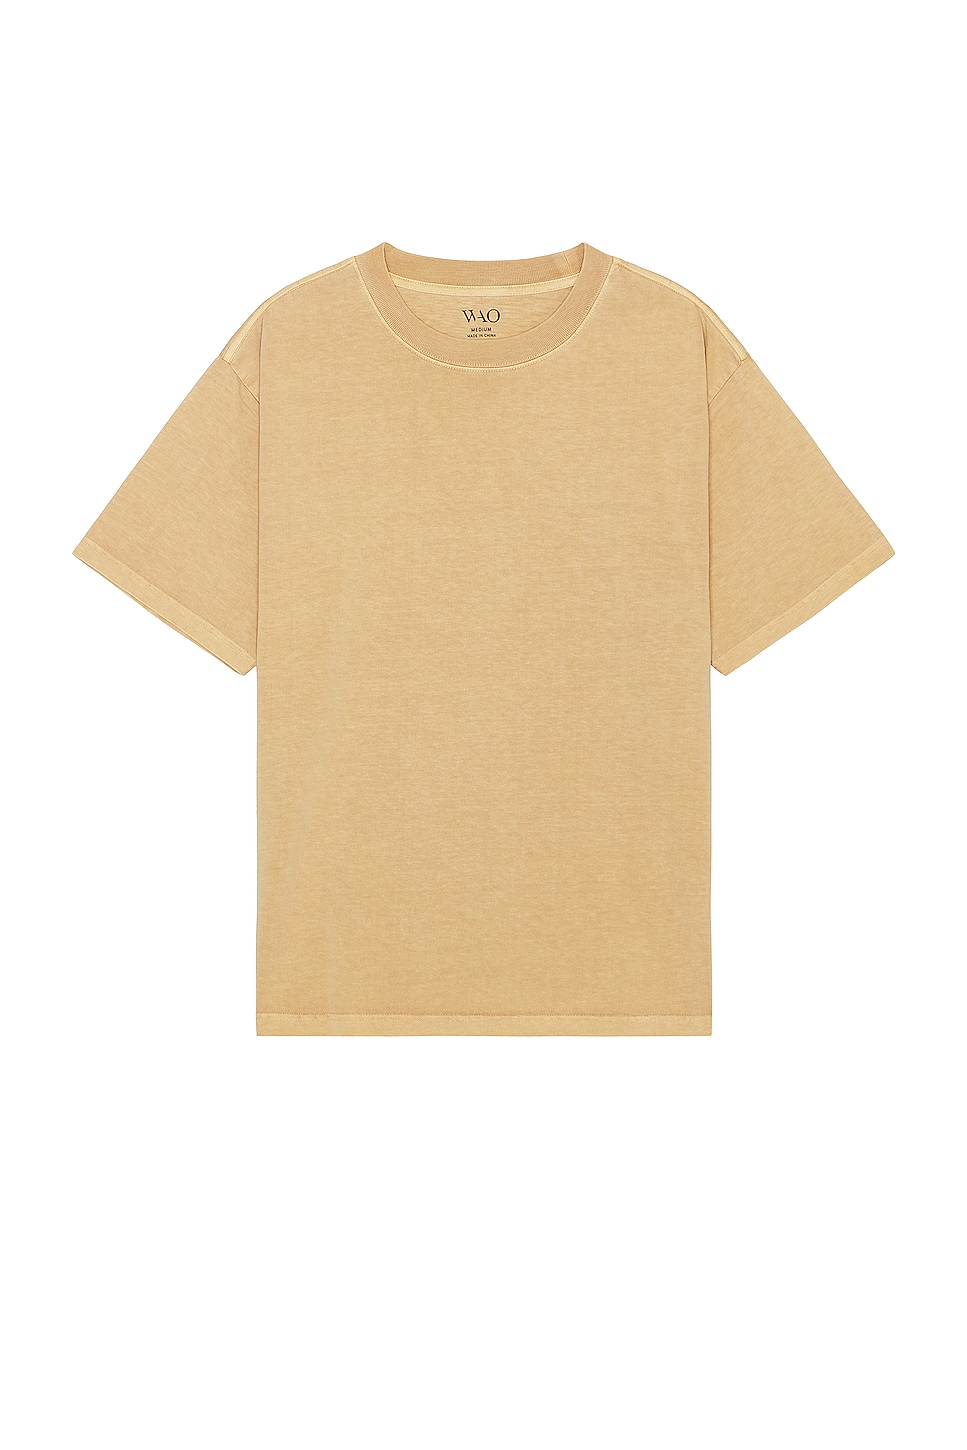 Image 1 of WAO The Relaxed Tee in terracotta